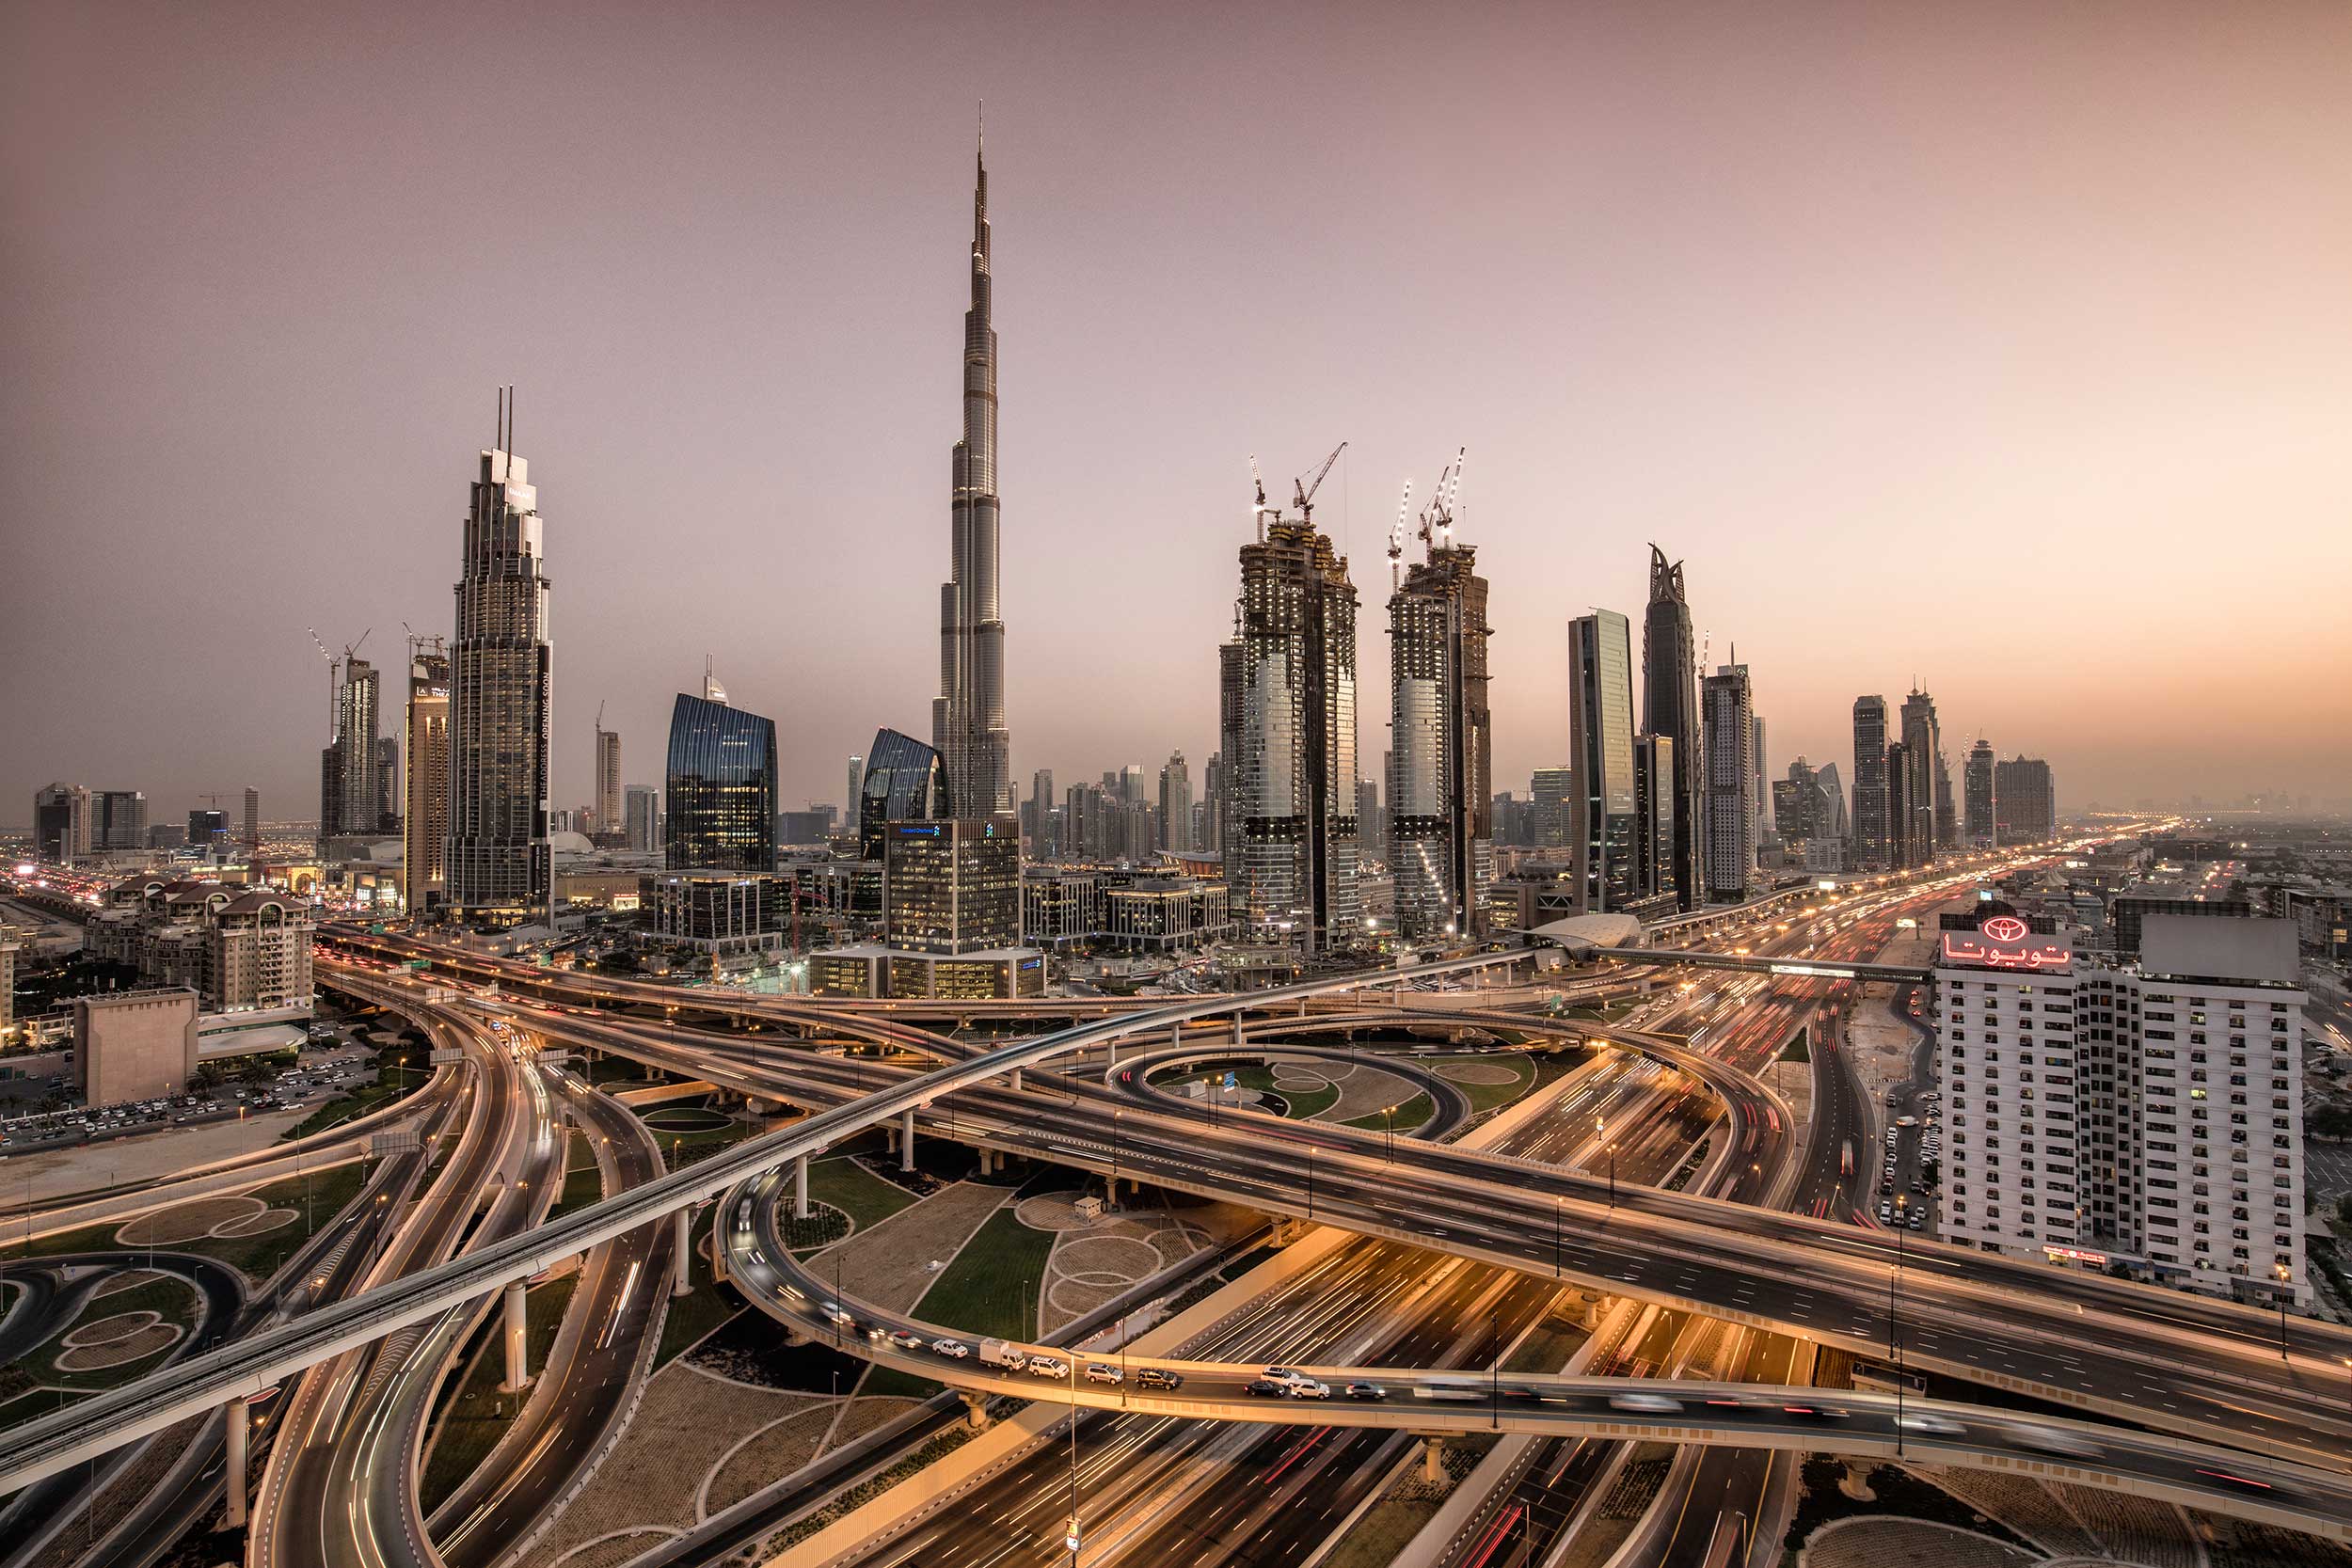 View of the skyscrapers, flyovers and highways of Dubai in the glow of sunset